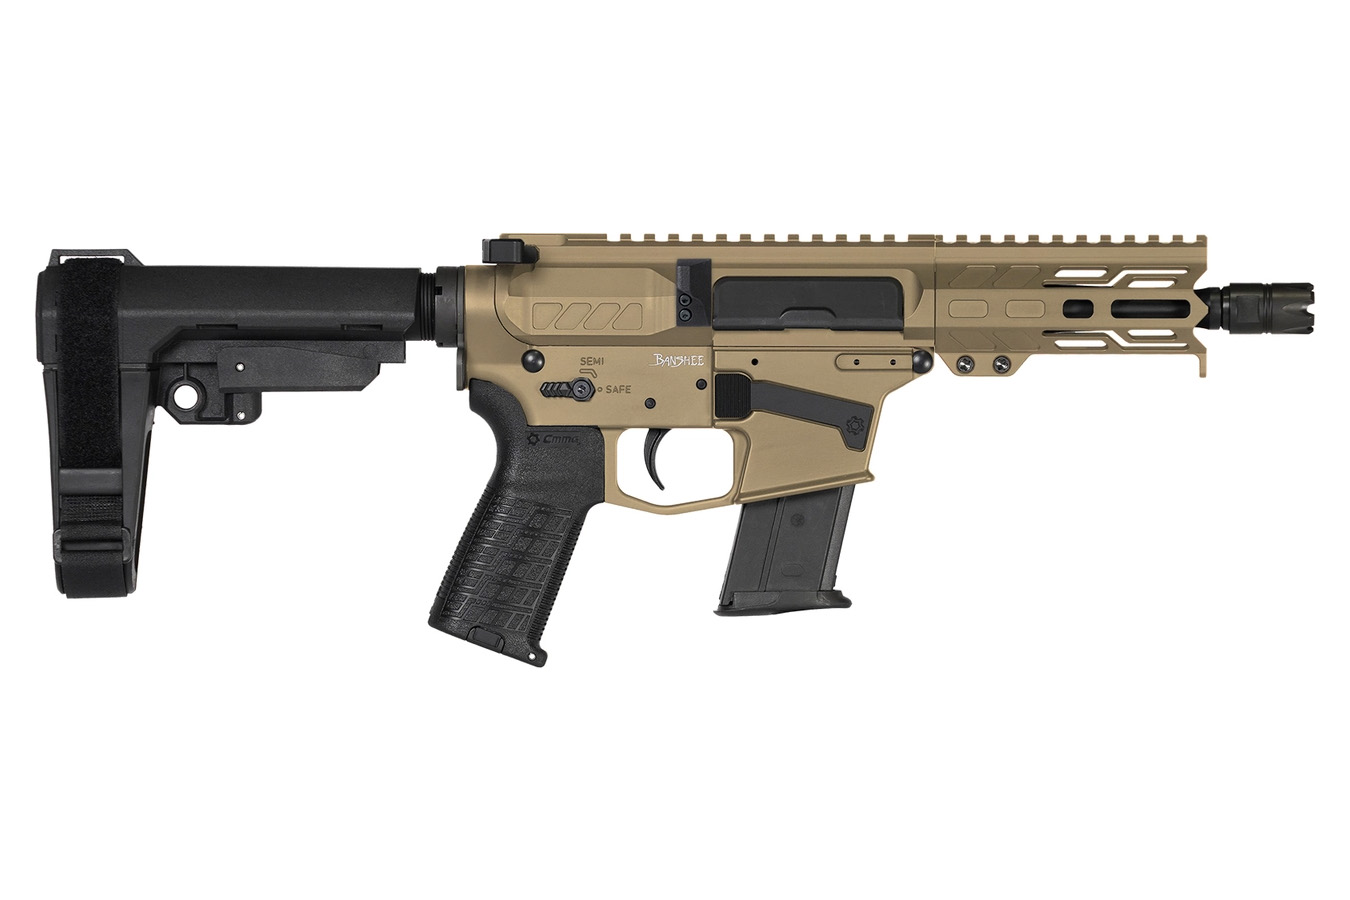 CMMG Banshee Mk57 5.7x28mm AR-15 Pistol with 5 Inch Barrel and Coyote ...